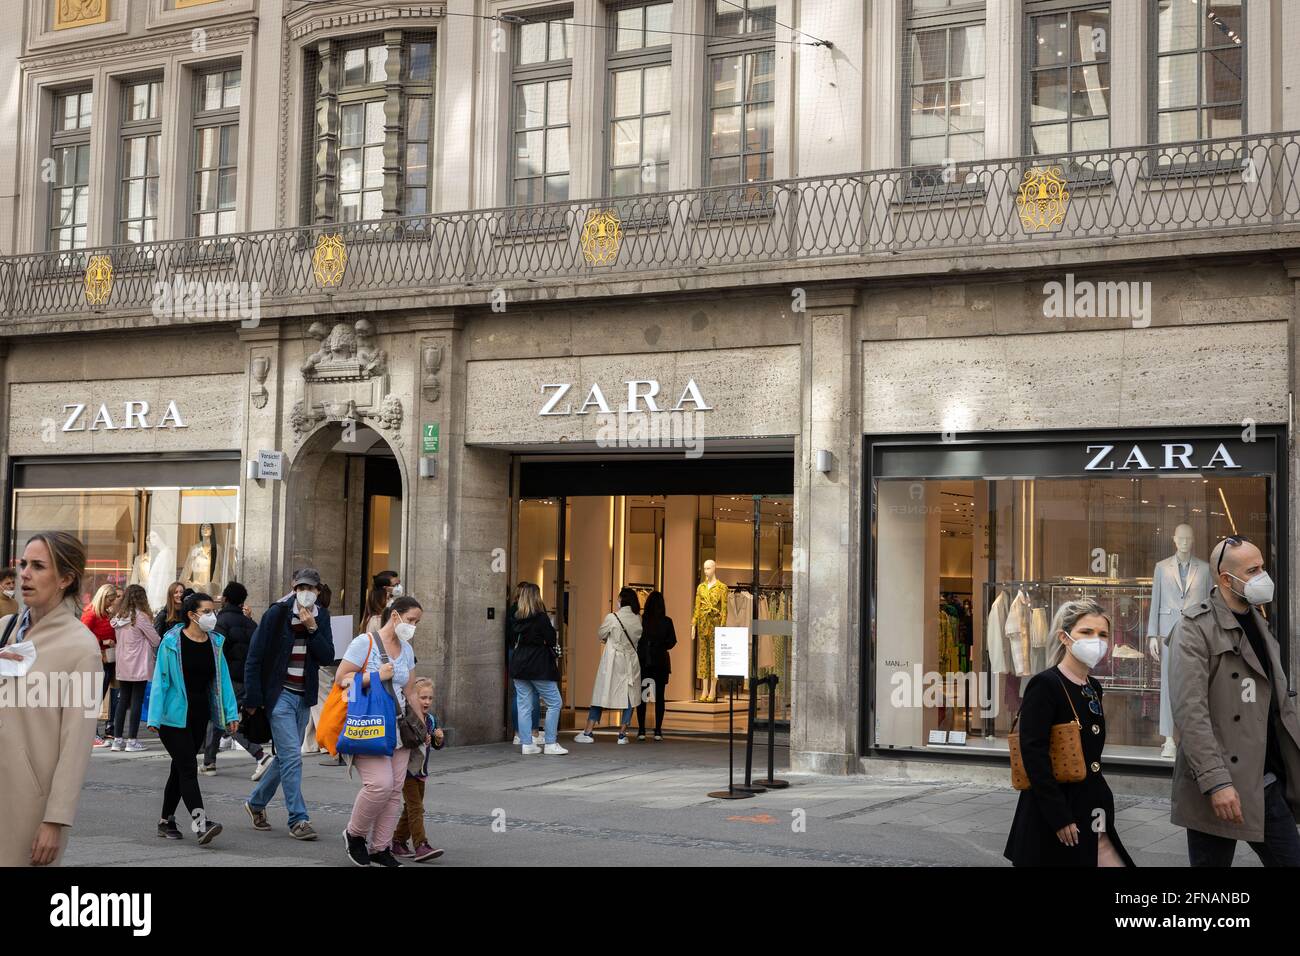 Zara Shop Window Display High Resolution Stock Photography and Images -  Alamy